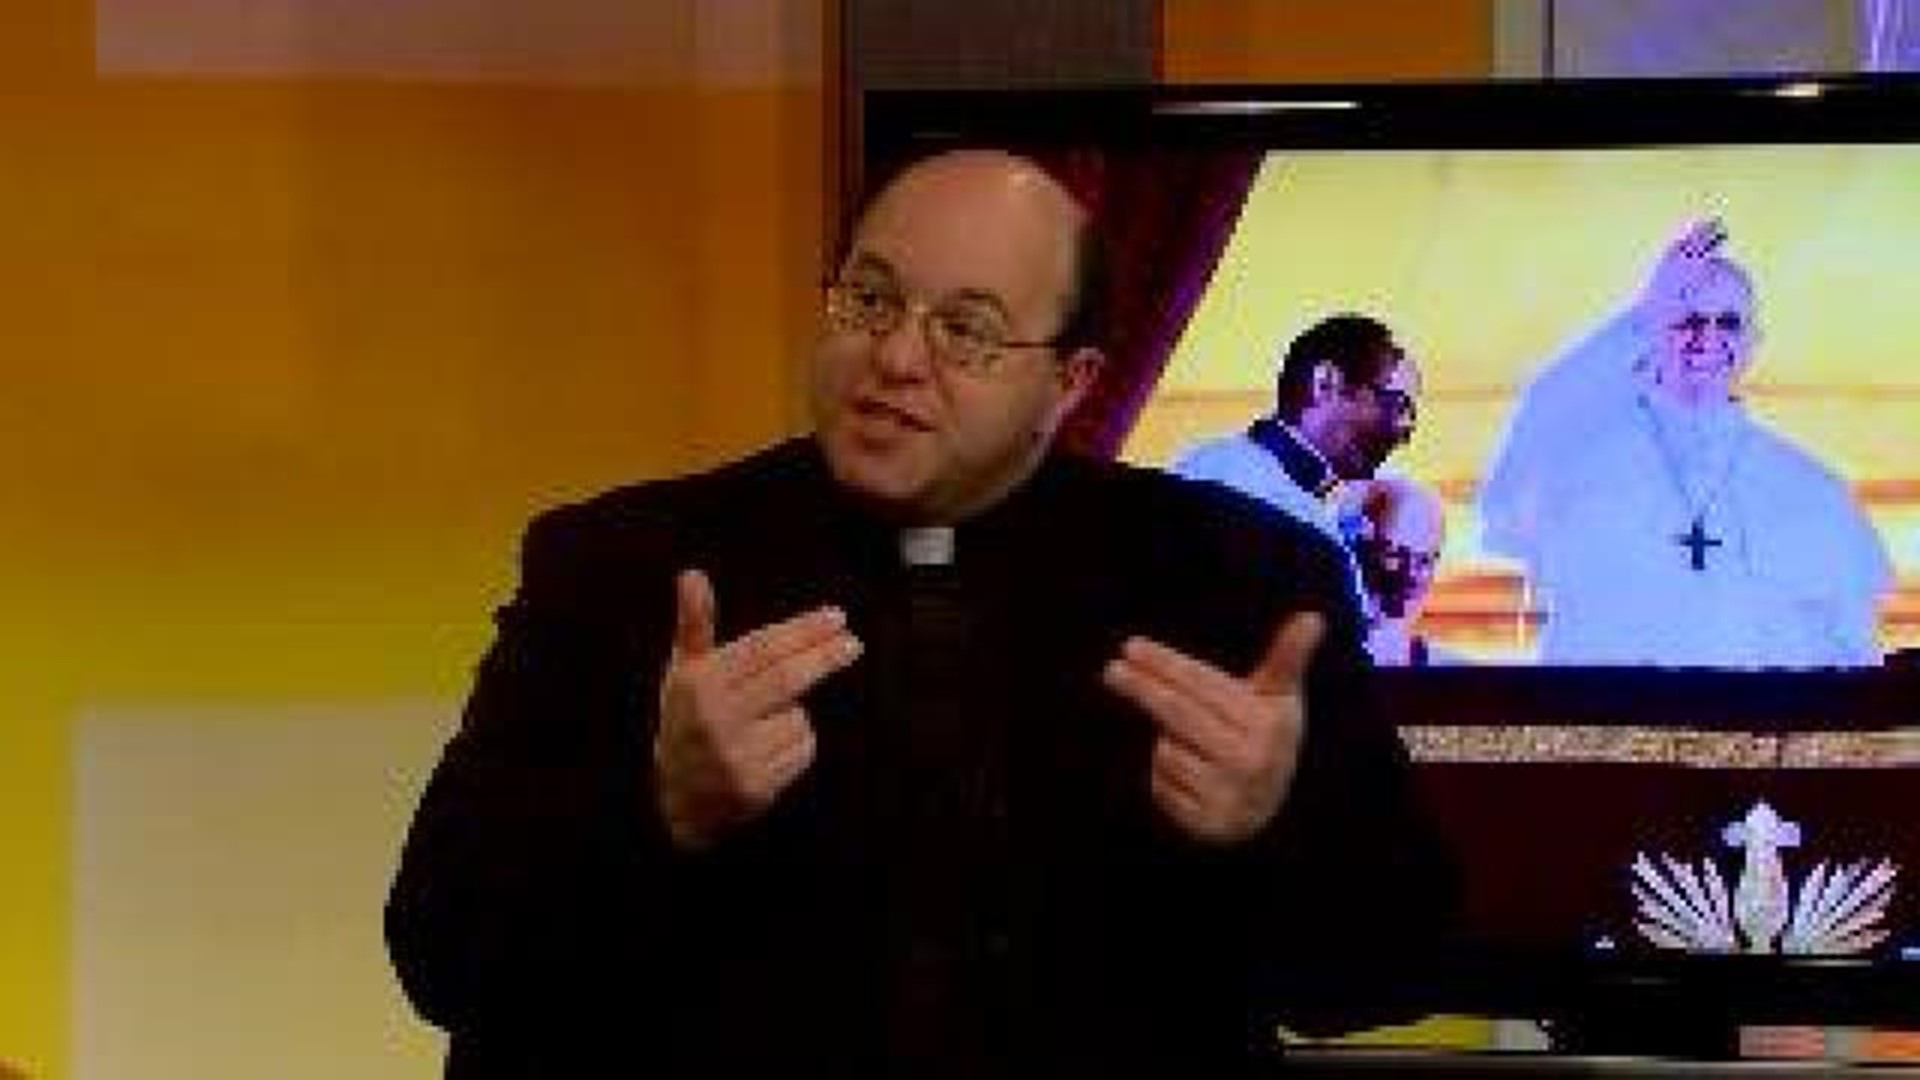 Local Priest Praises Cardinals' Choice for Pope